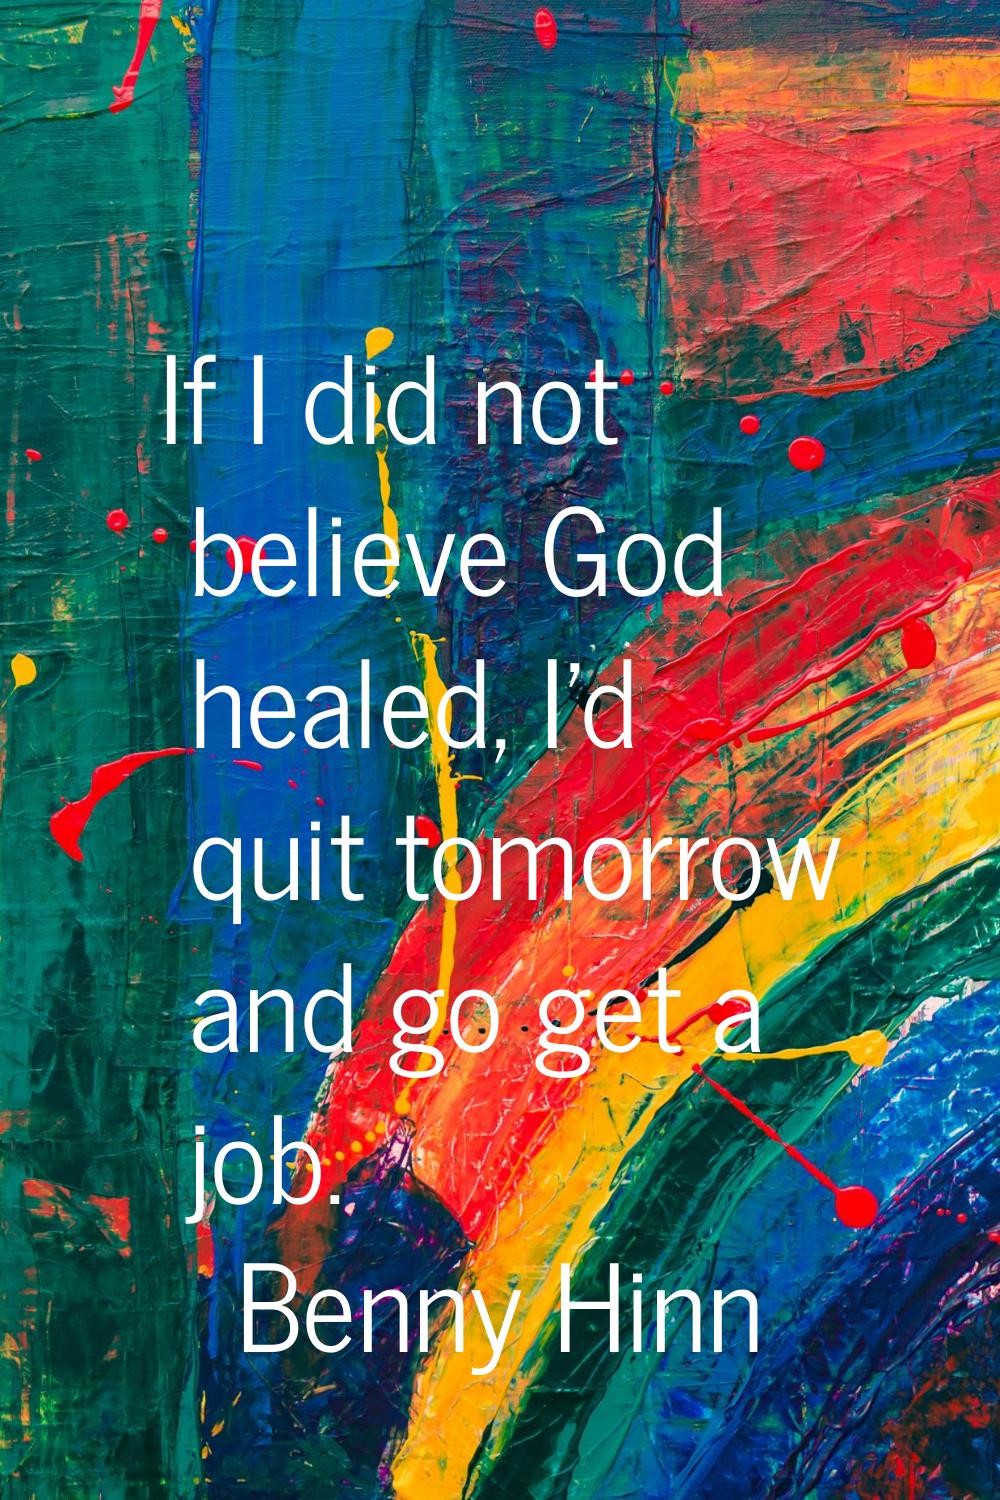 If I did not believe God healed, I'd quit tomorrow and go get a job.